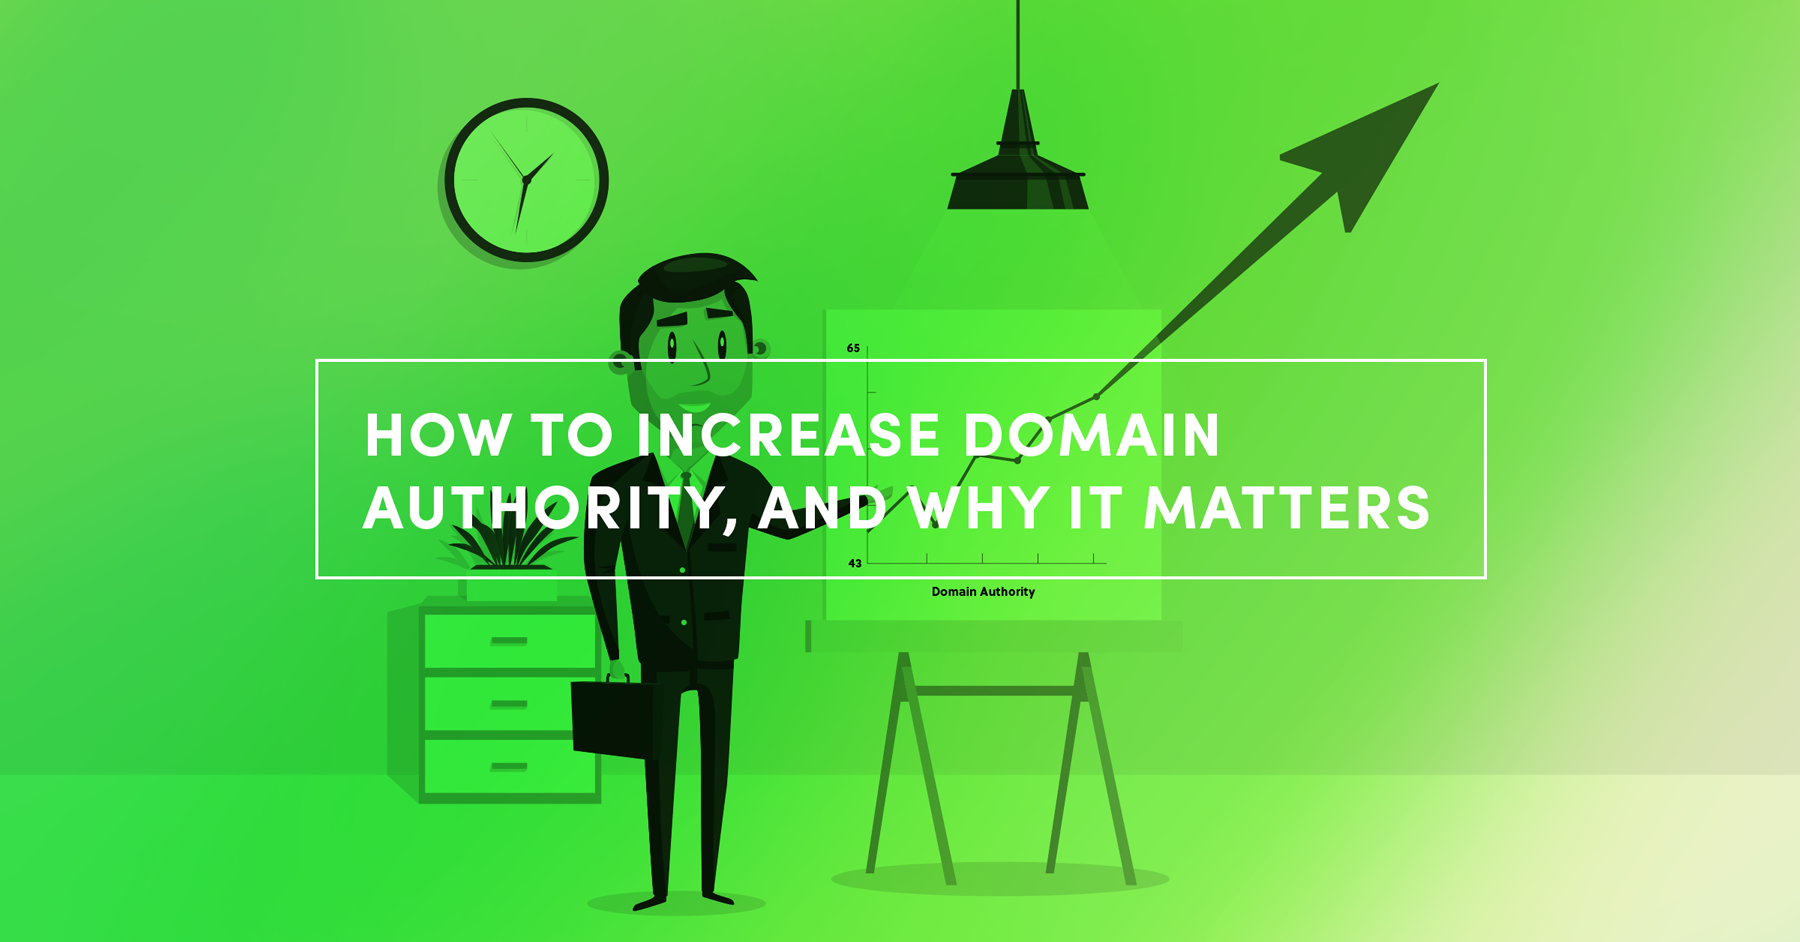 How to increase domain authority, and why it matters